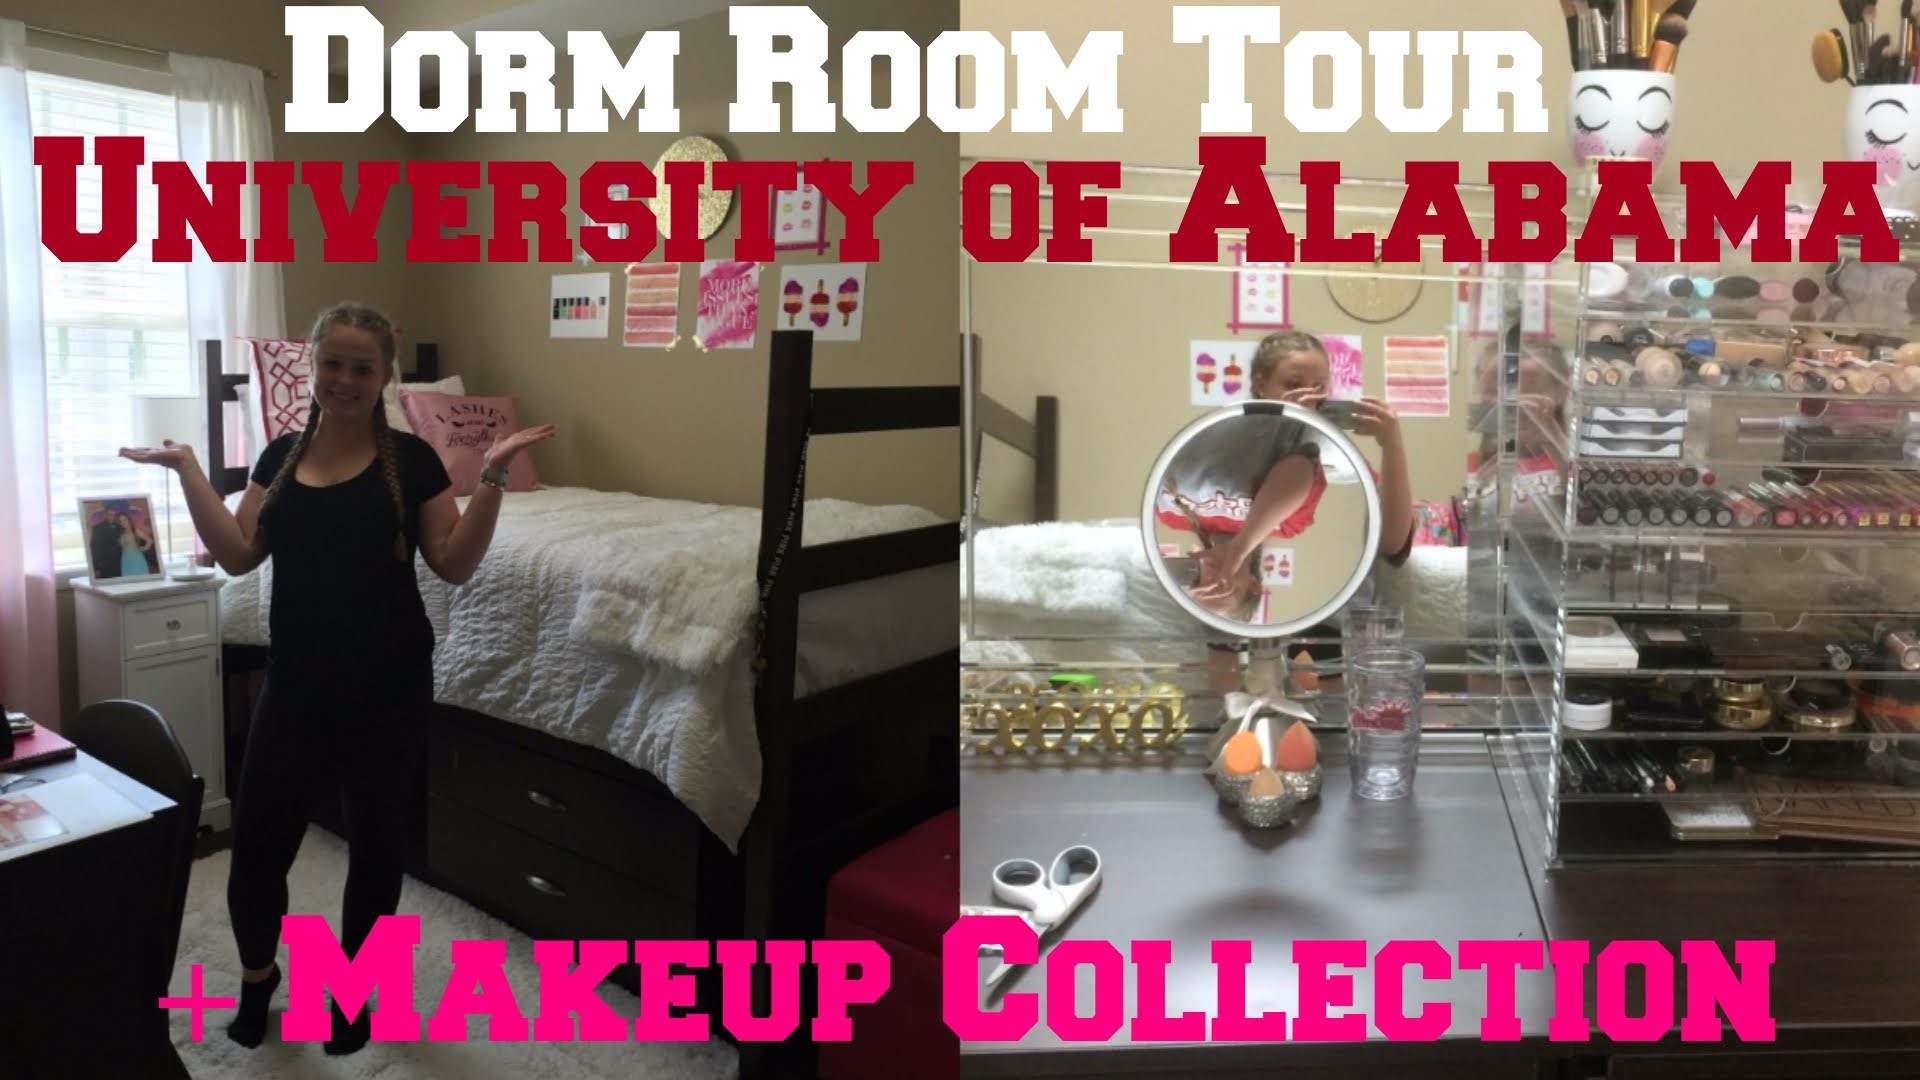 1920x1080 University of Alabama Dorm Room Tour | Presidential 2 (Part1) | Makeup  Collection - YouTube